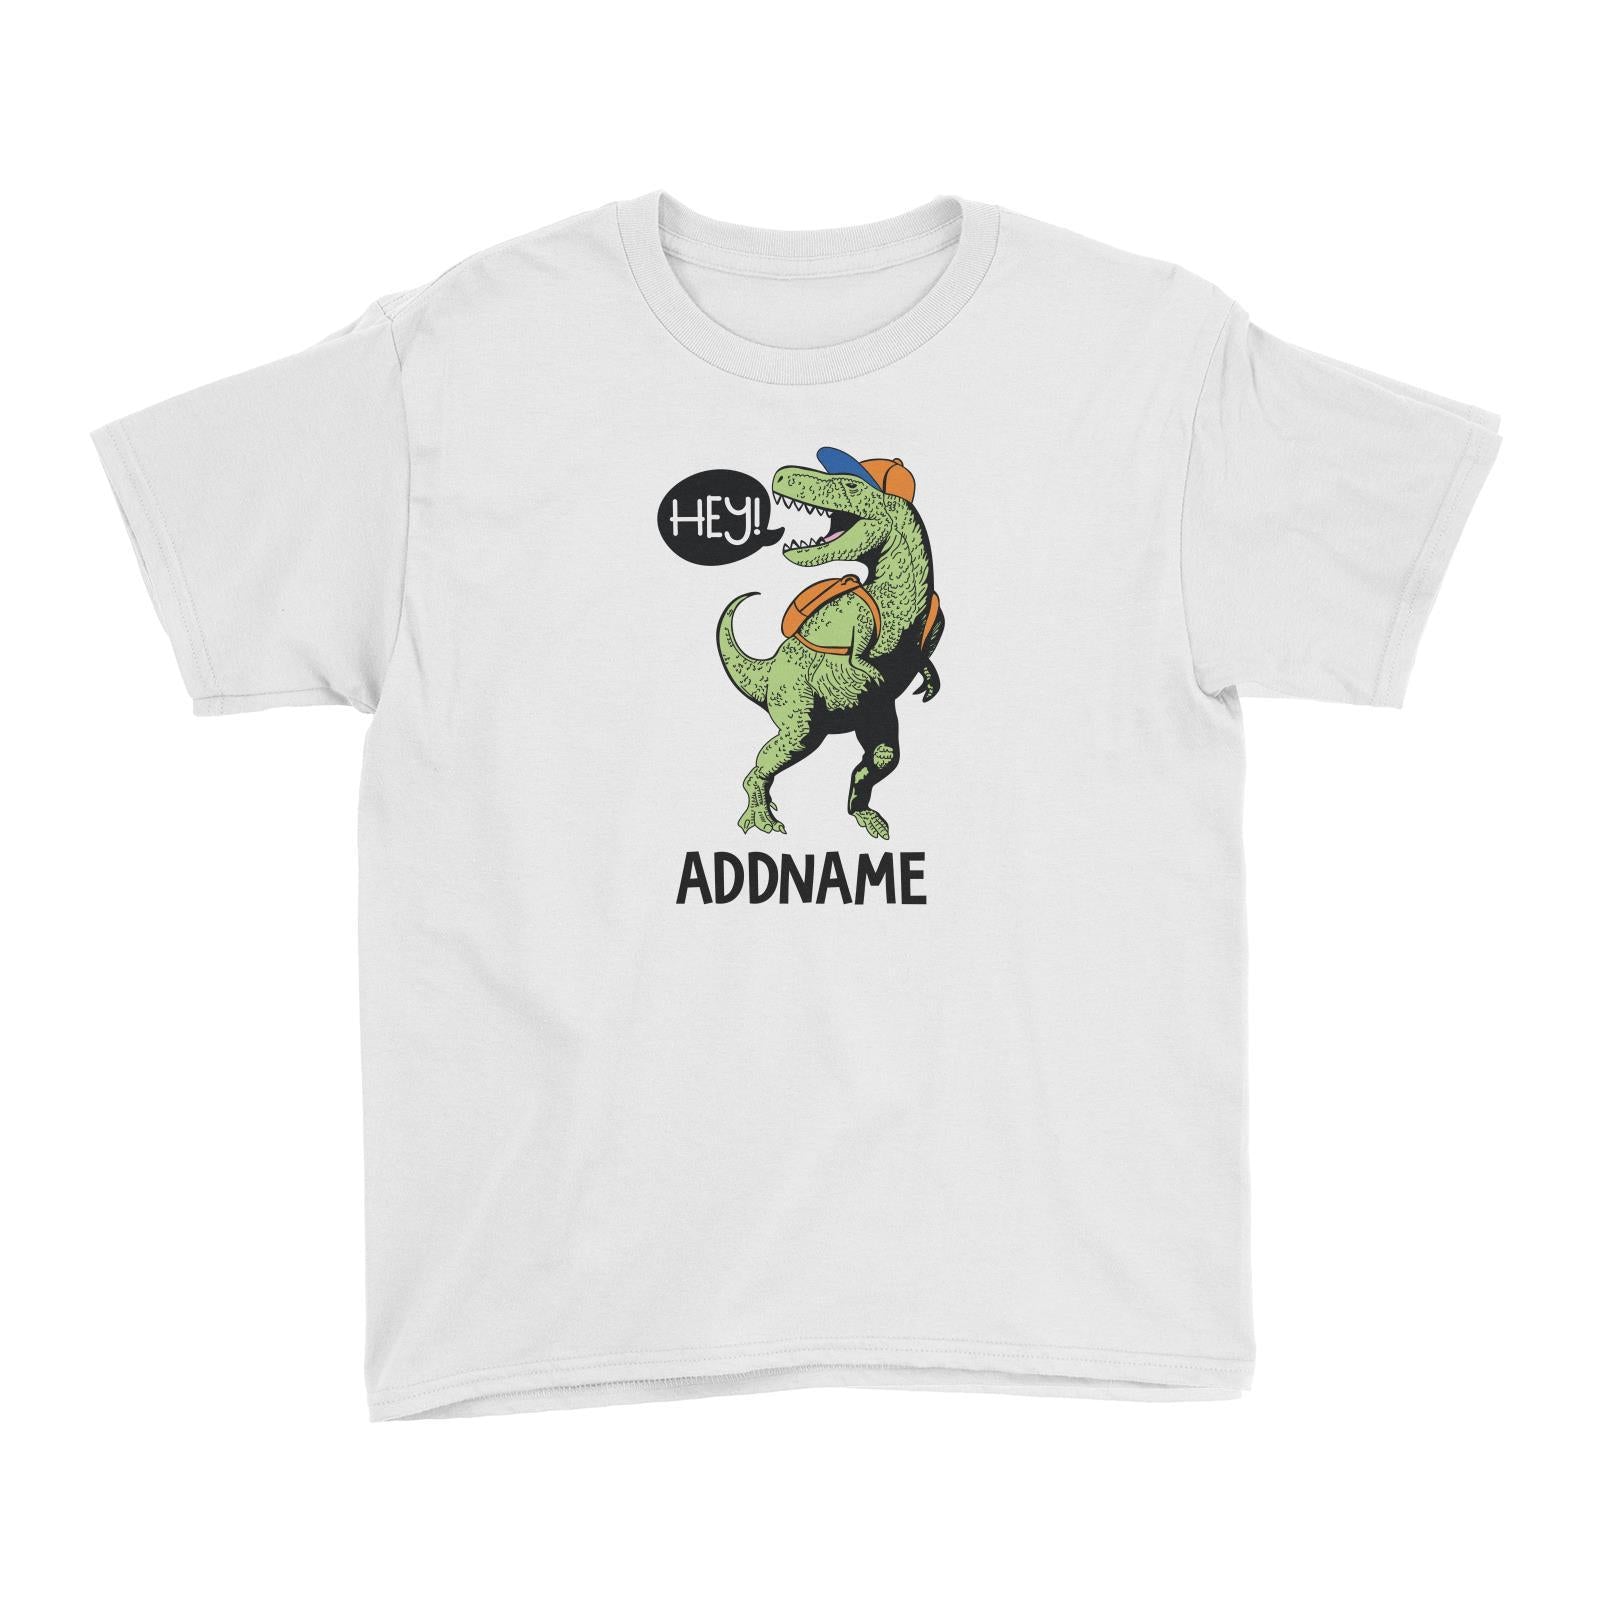 Cool Vibrant Series Hey Dinosaur With Back Pack Addname Kid's T-Shirt